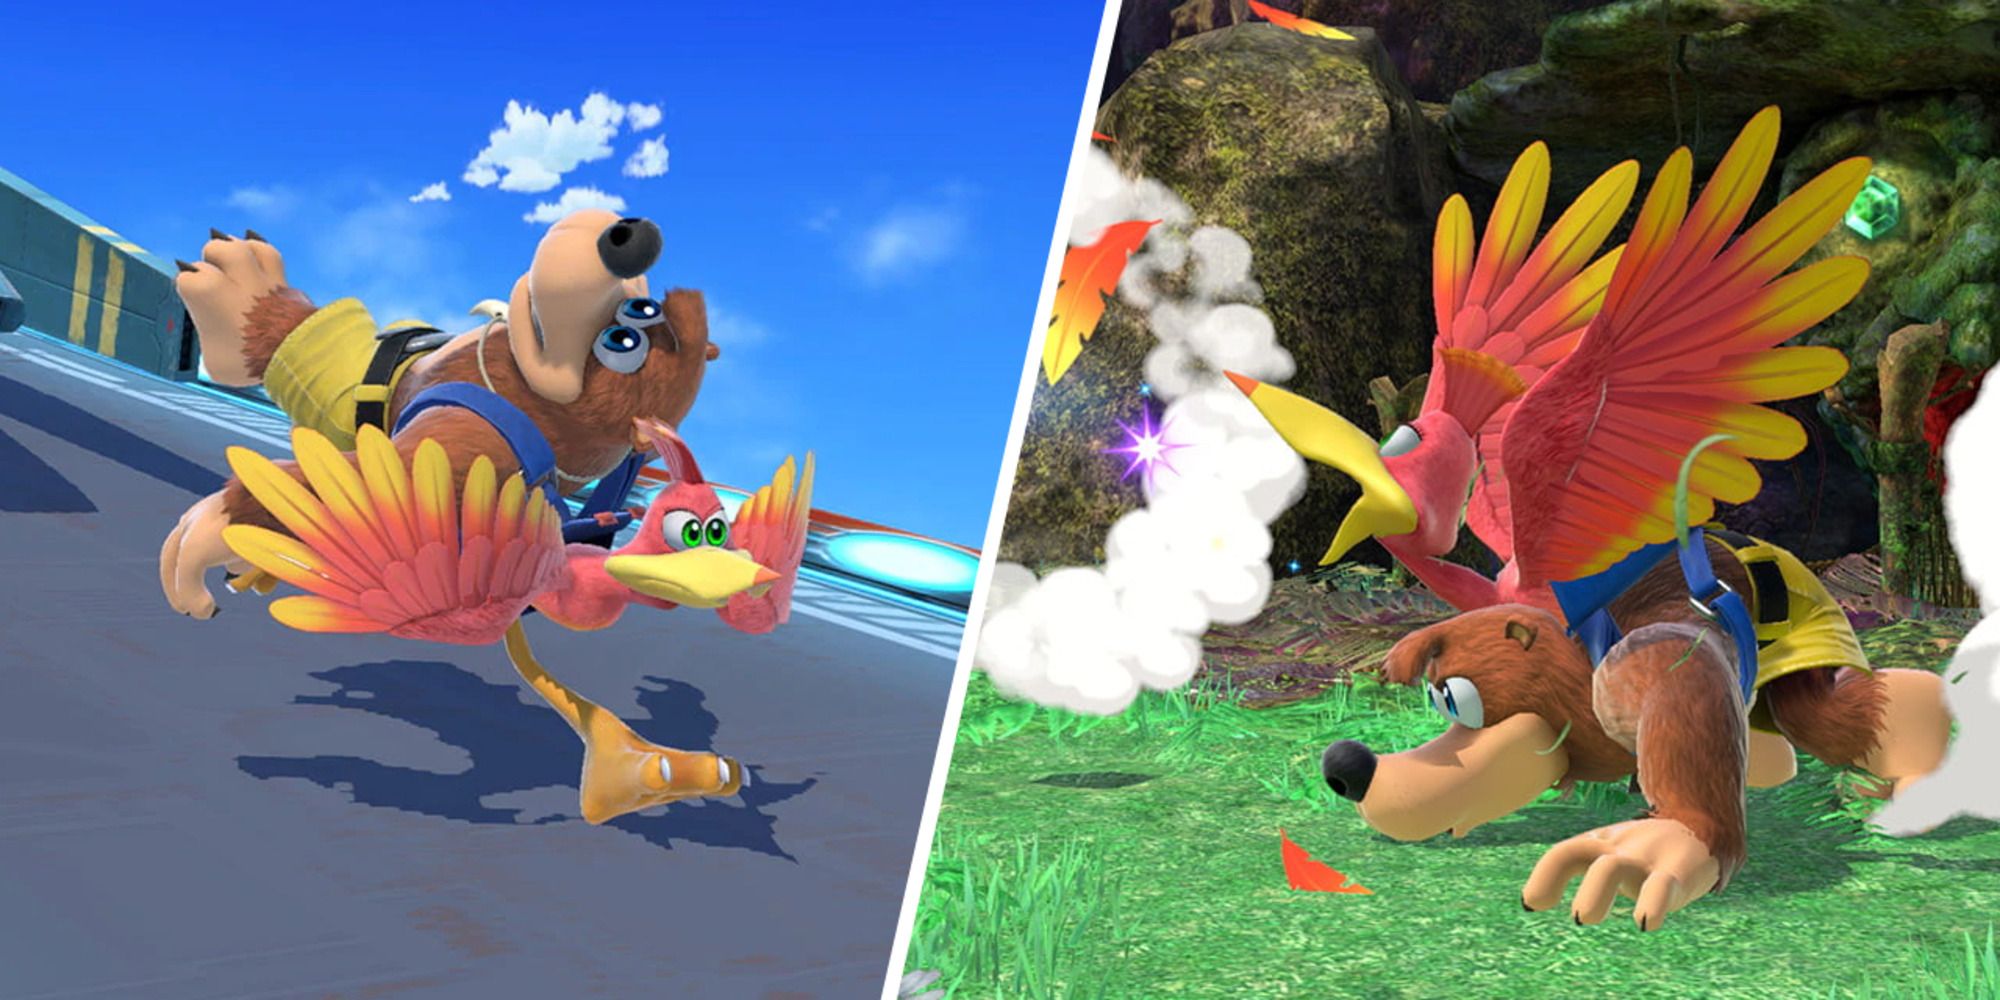 Banjo & Kazooie running on the left and using their Neutral-B on the right in Super Smash Bros. Ultimate.